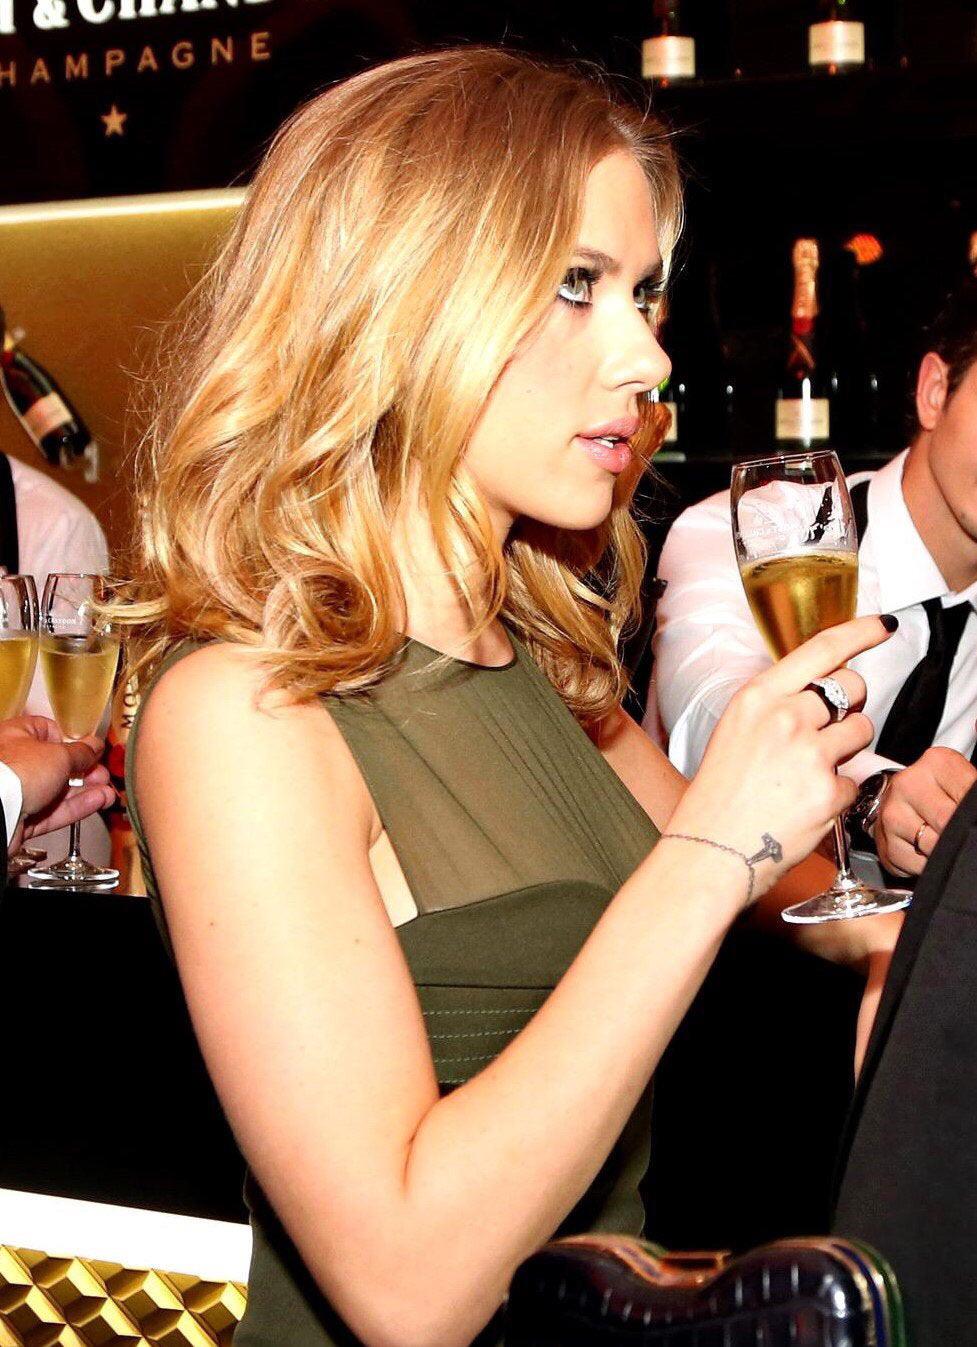 Scarlett Johansson thinking about what you’re going to do to her later